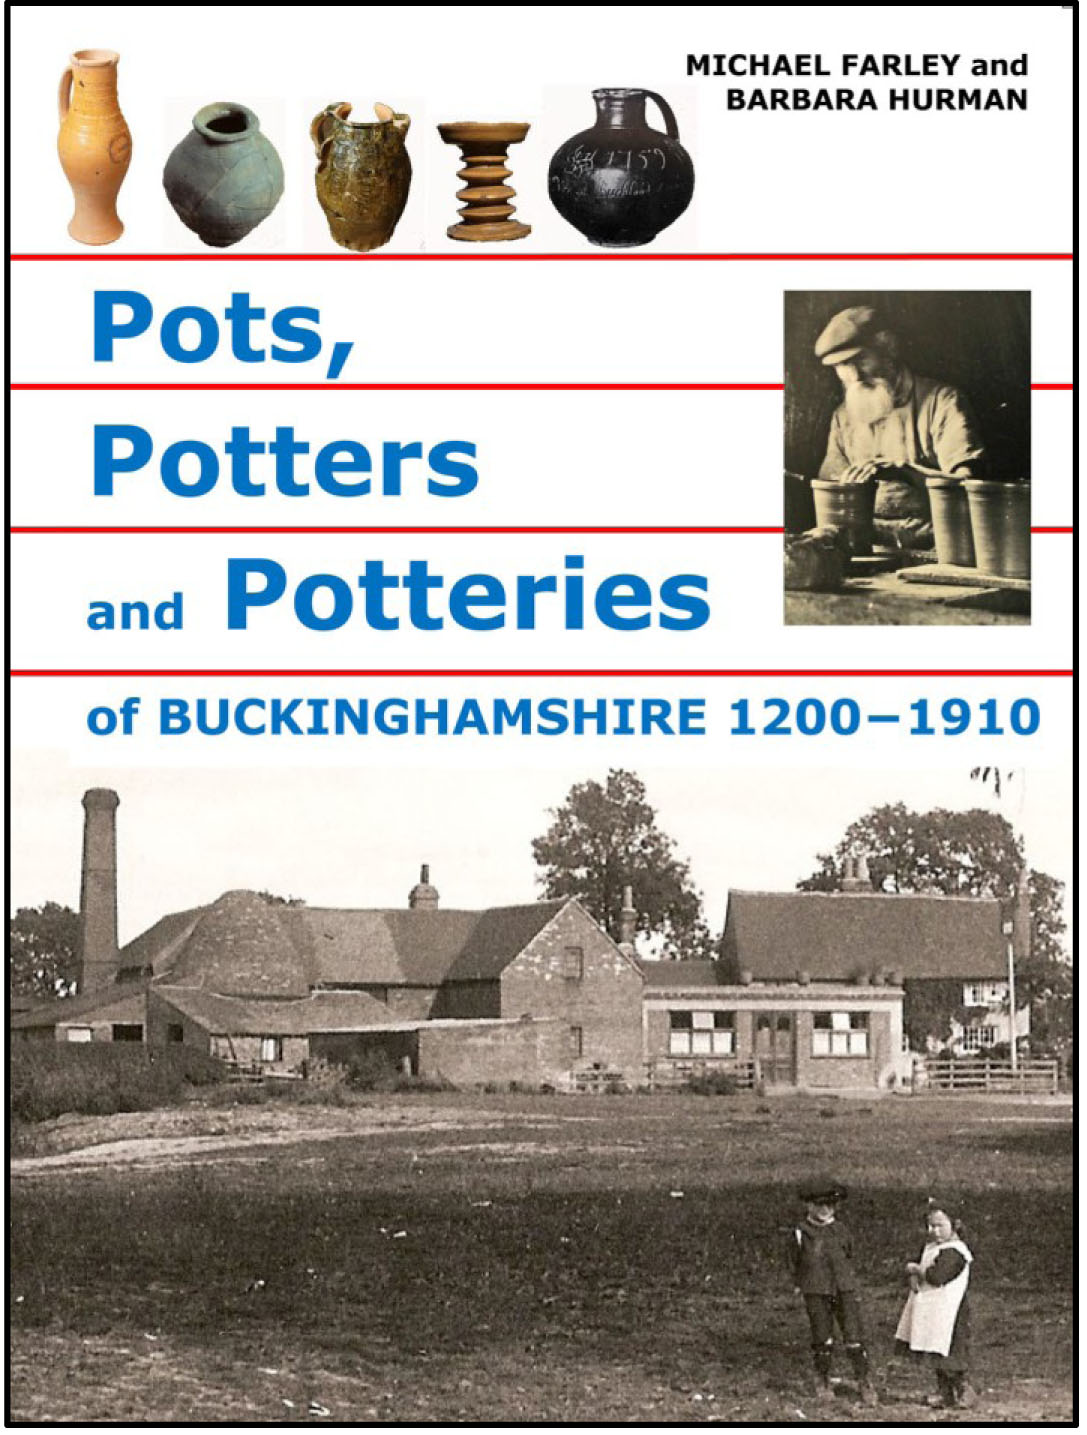 Pots, potters and potteries book cover